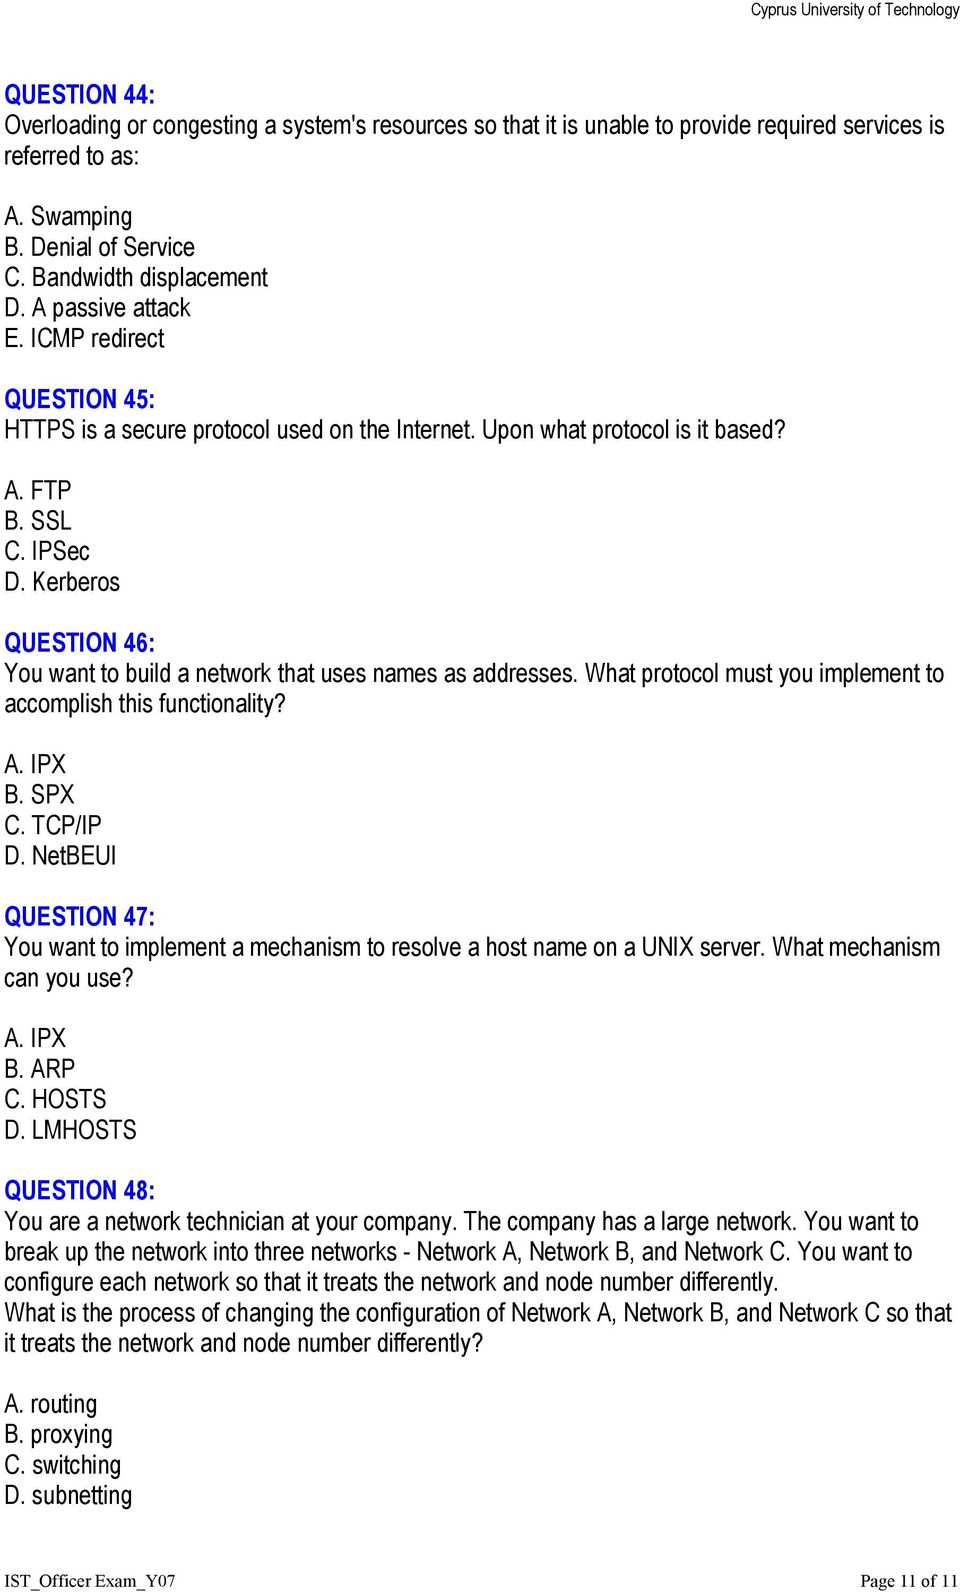 Kerberos QUESTION 46: You want to build a network that uses names as addresses. What protocol must you implement to accomplish this functionality? A. IPX B. SPX C. TCP/IP D.